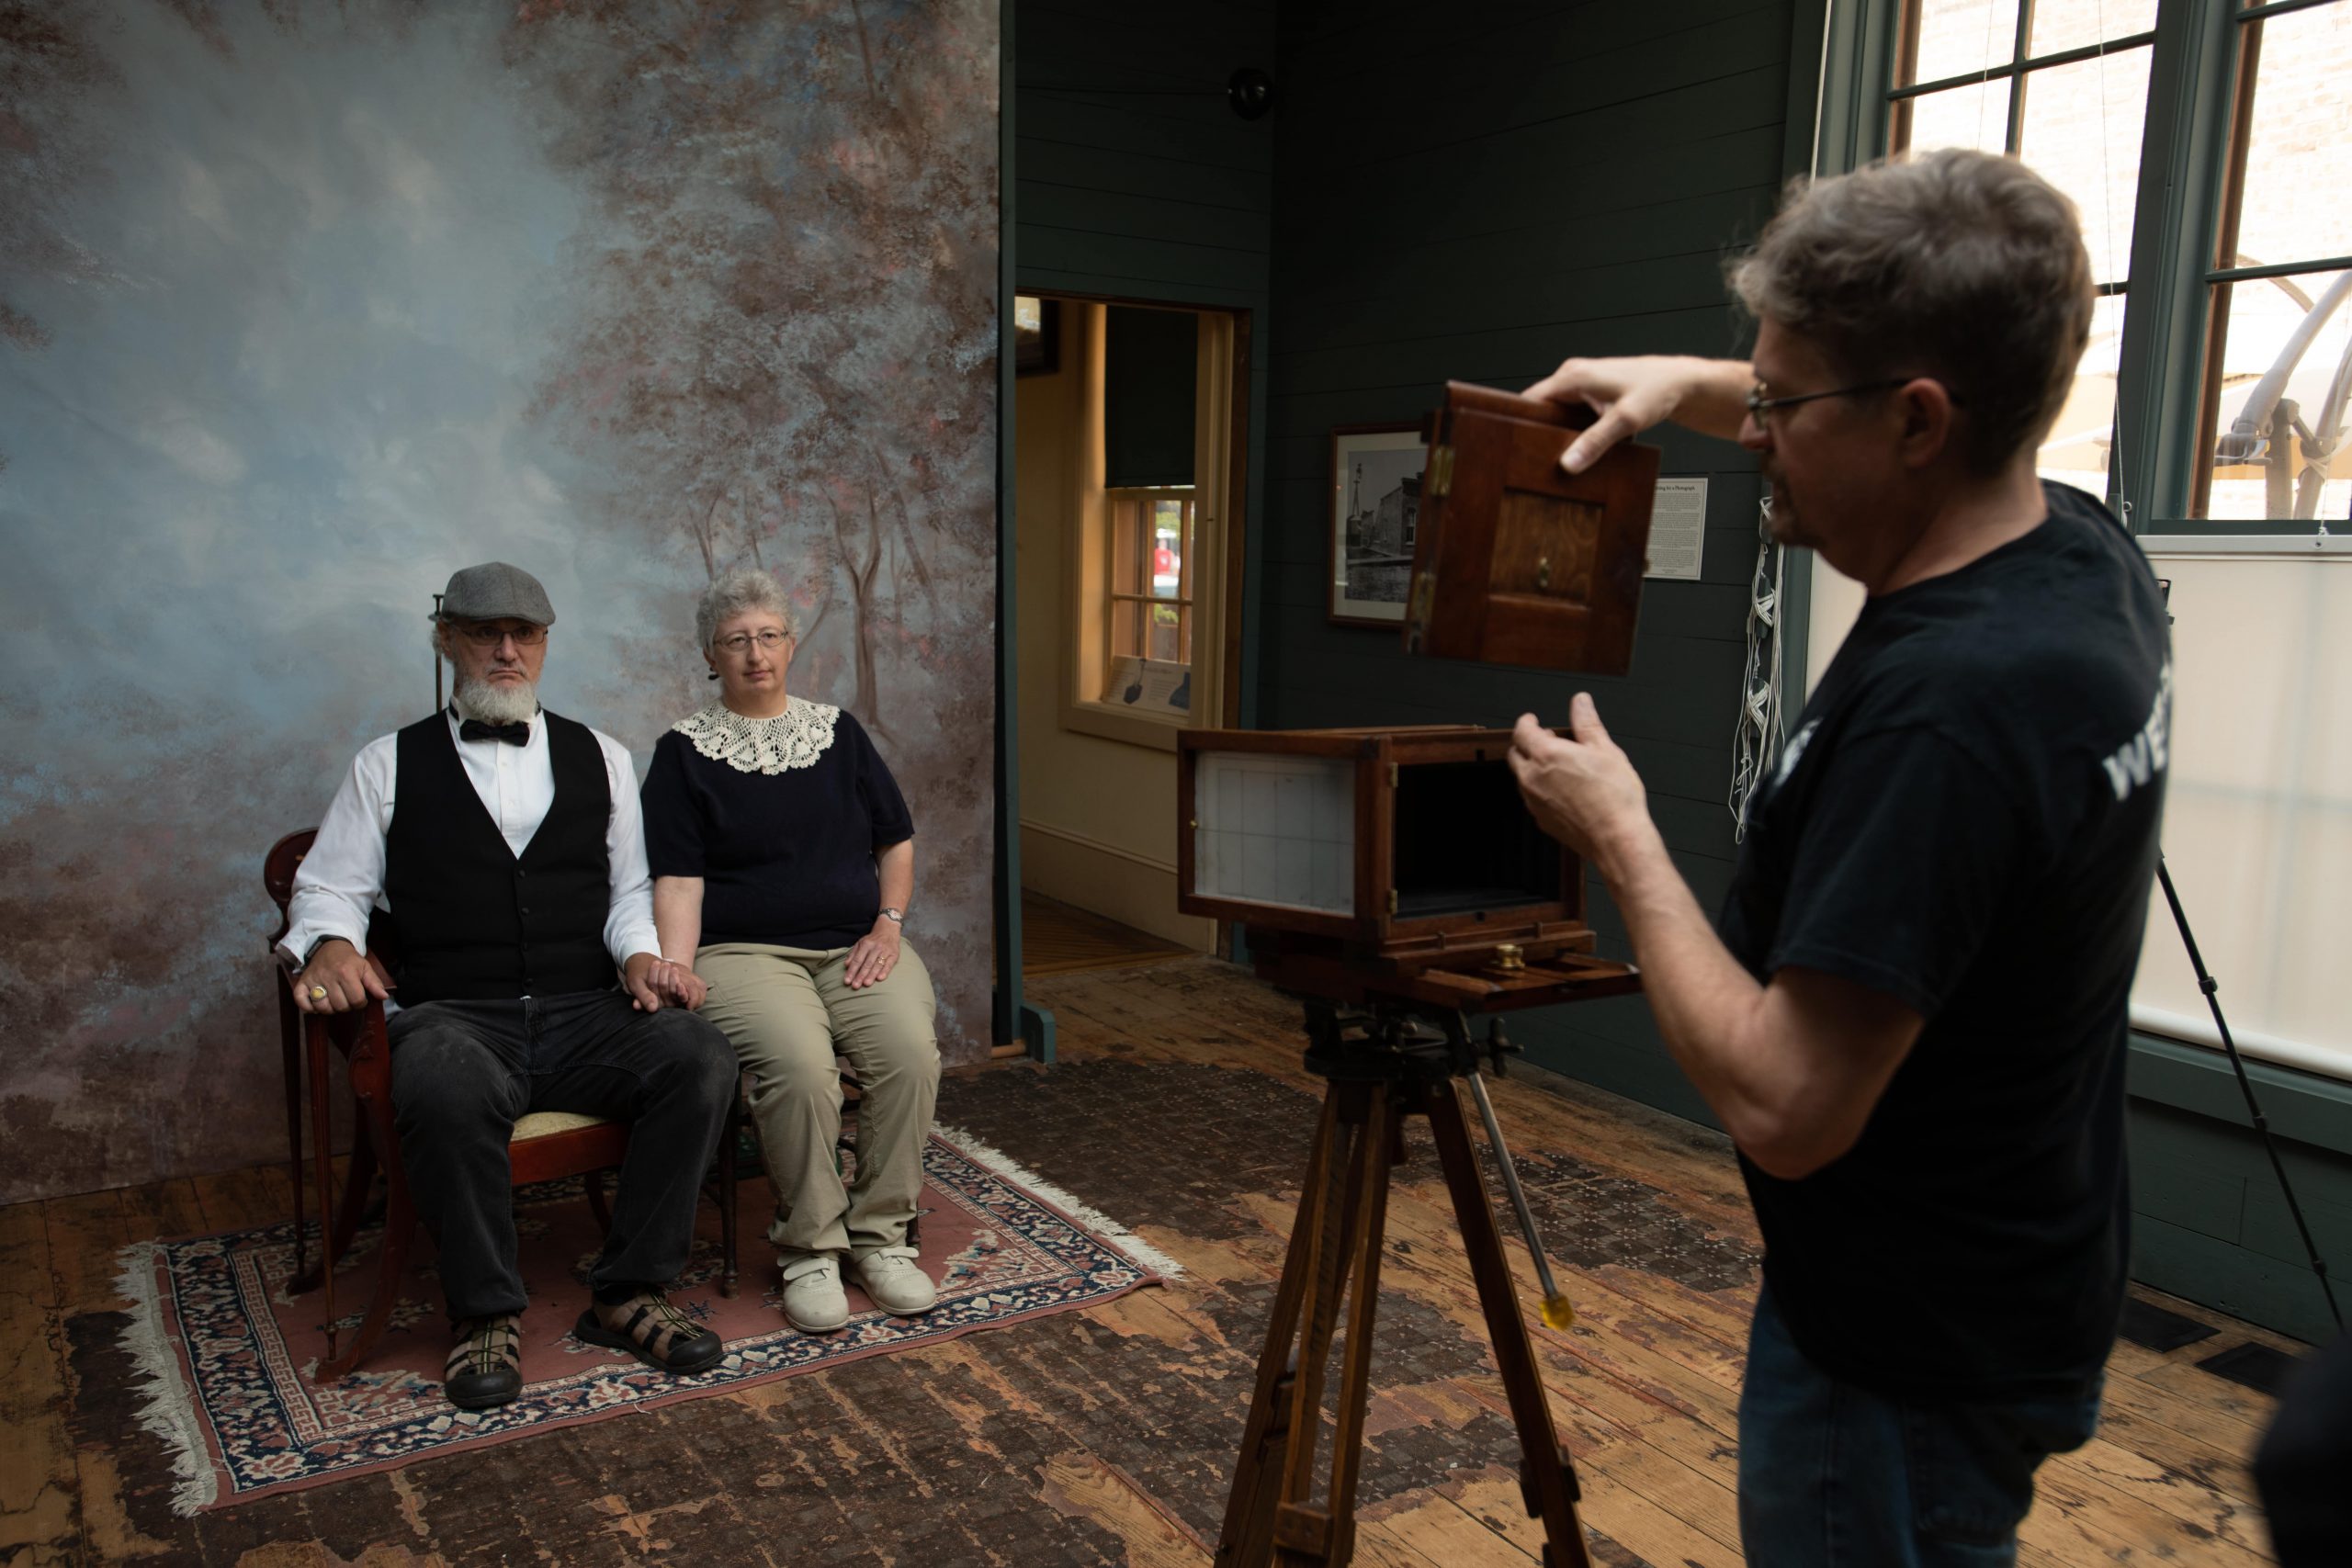 Dave prepares to take photo to create  tintypes of an older couple sitting and holding hands in mildly old fashioned clothing. 